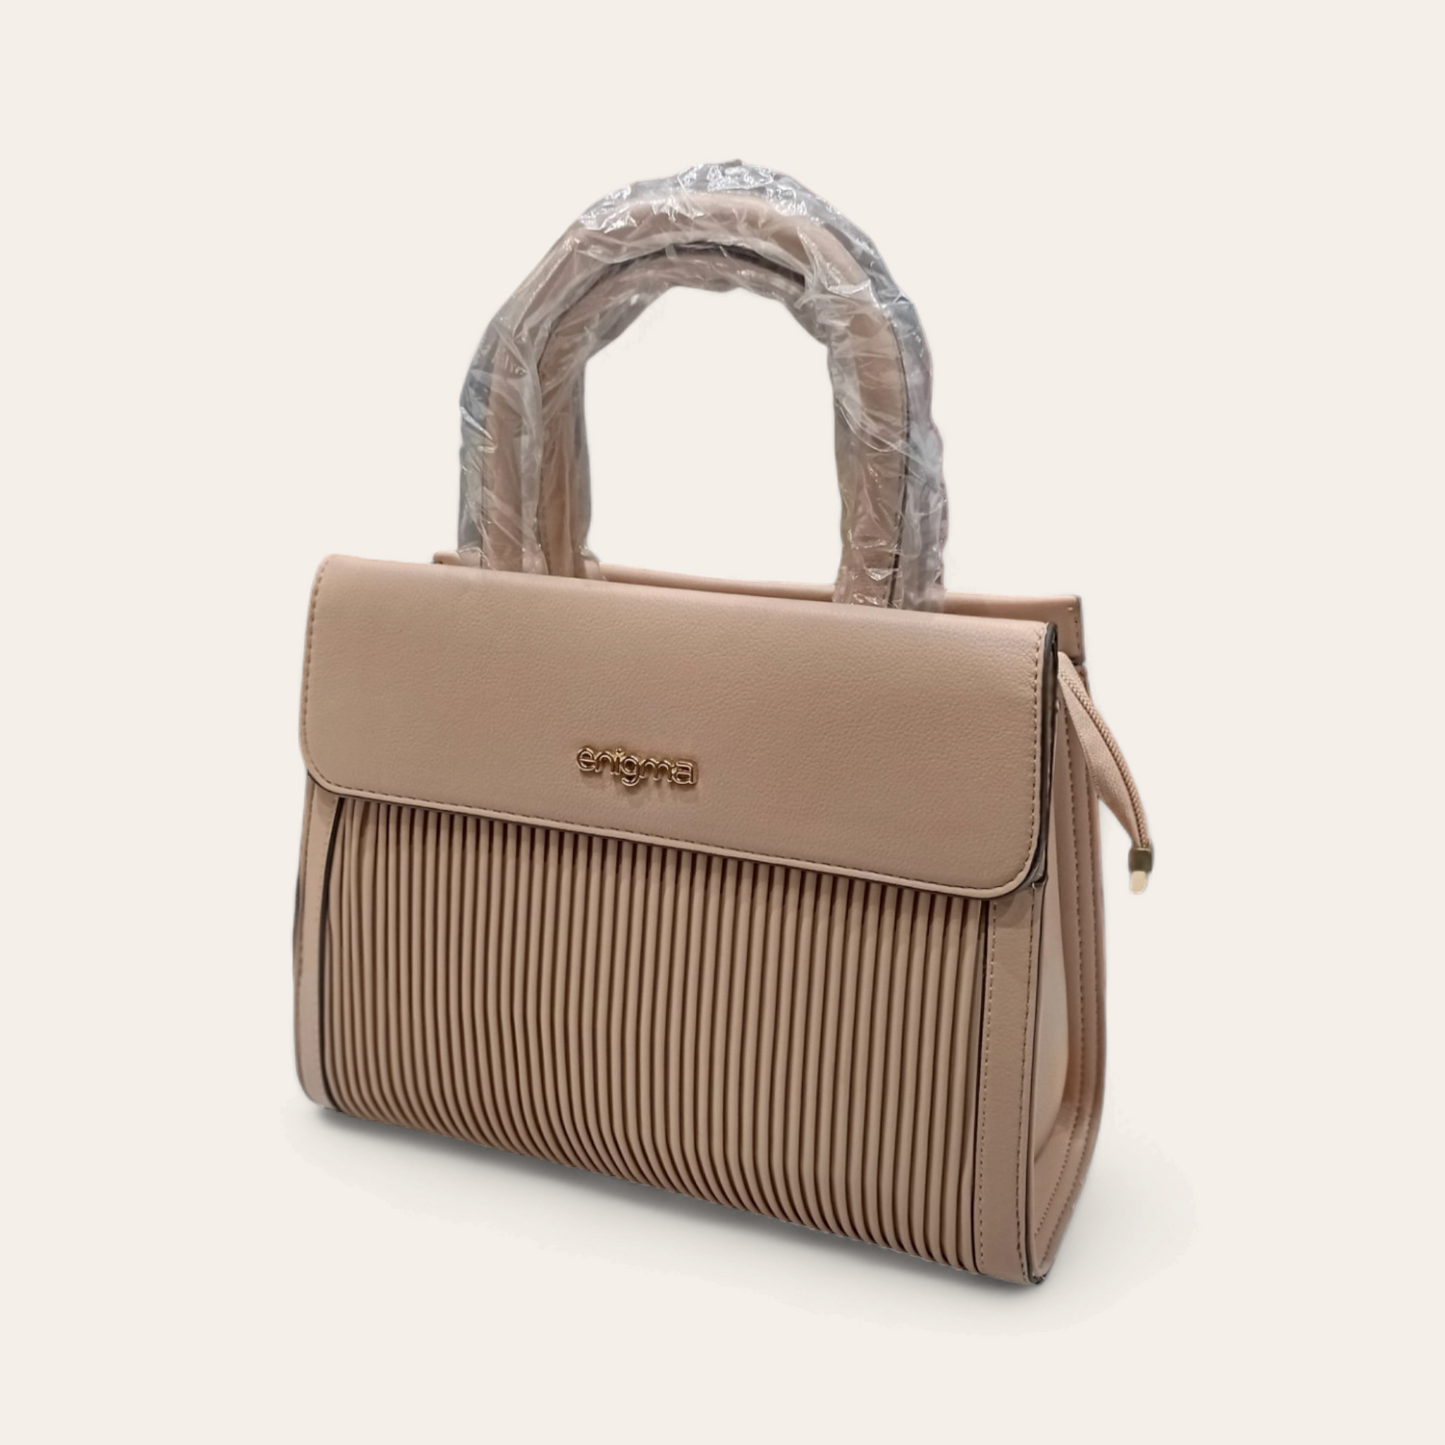 Enigma premium Party wear | office use handbag with sling belt